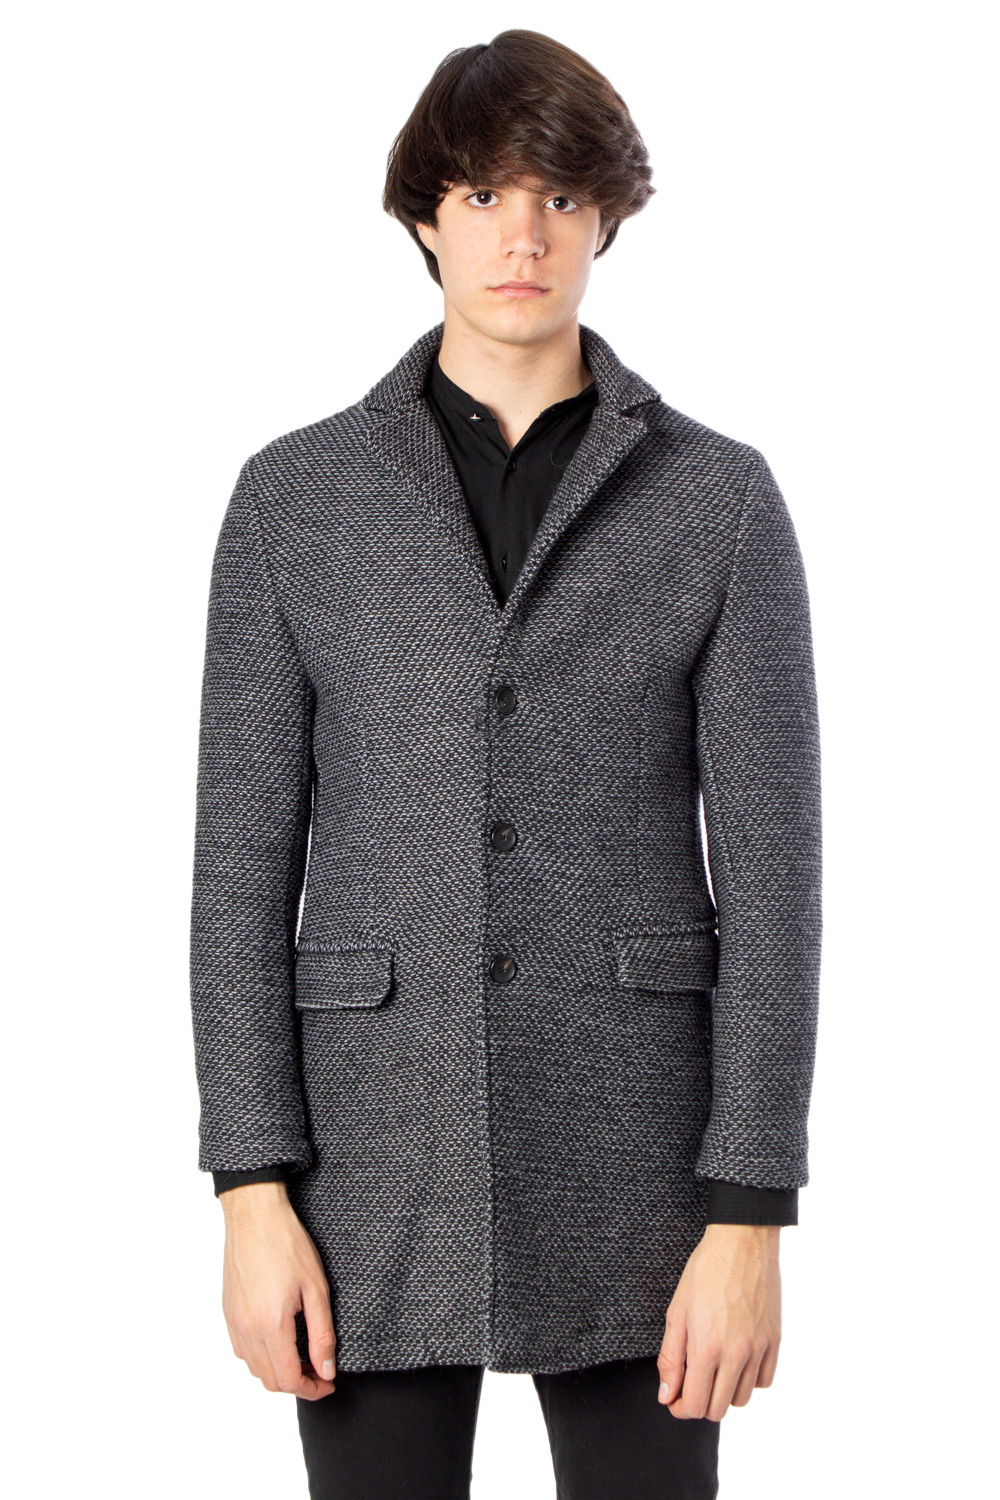 Hydra Clothing Cappotto Panno 71417 - 1